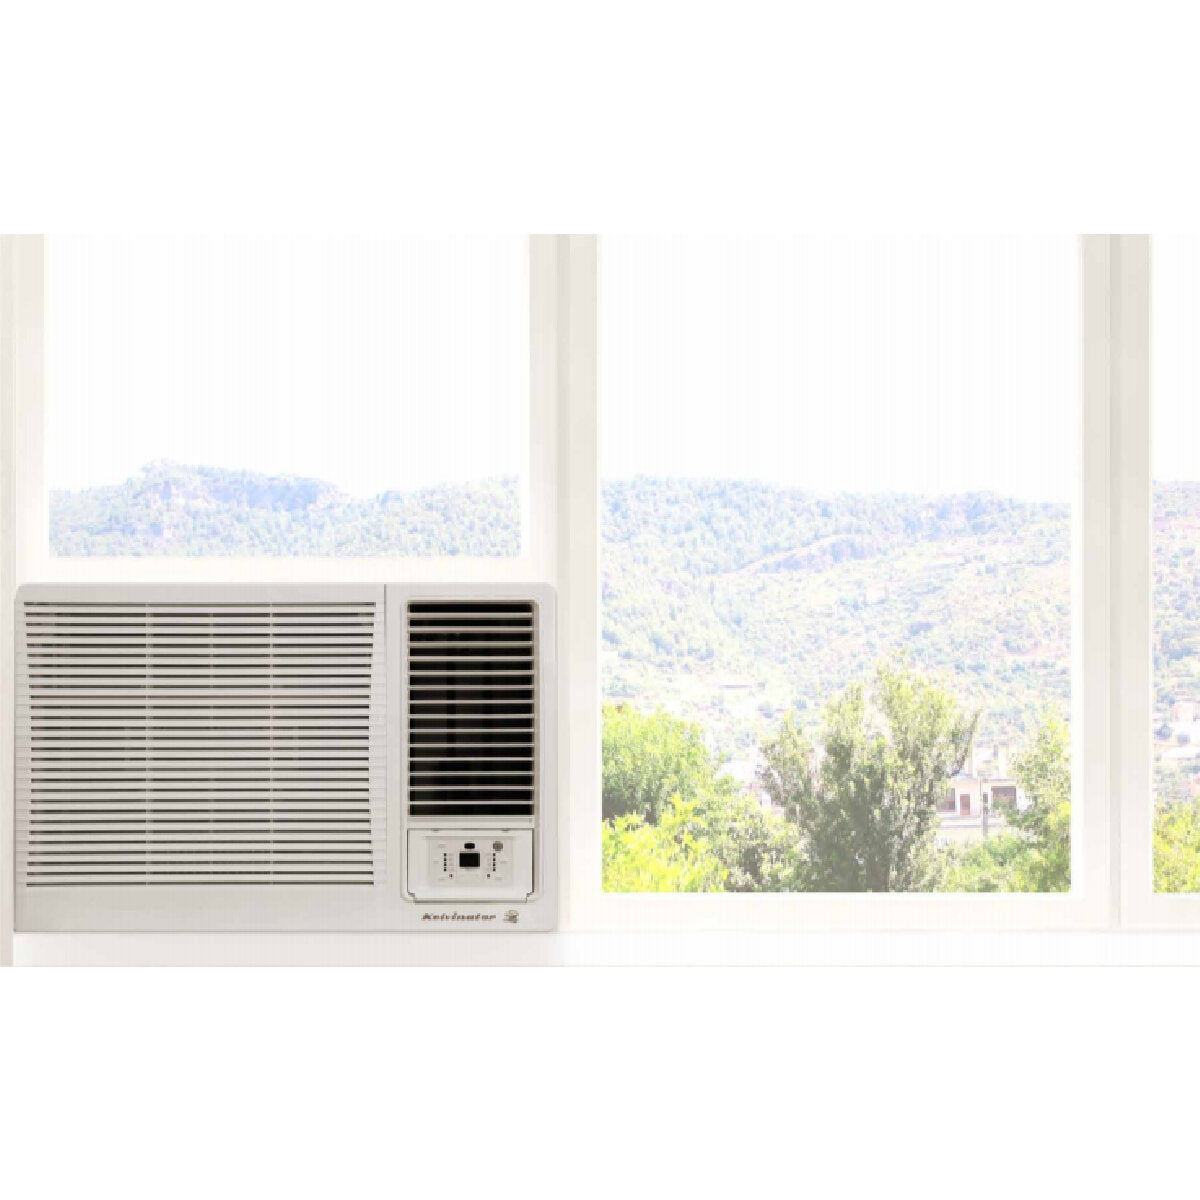 Kelvinator 6.0kW Window-Wall Cooling Only Air Conditioner - Brisbane Home Appliances